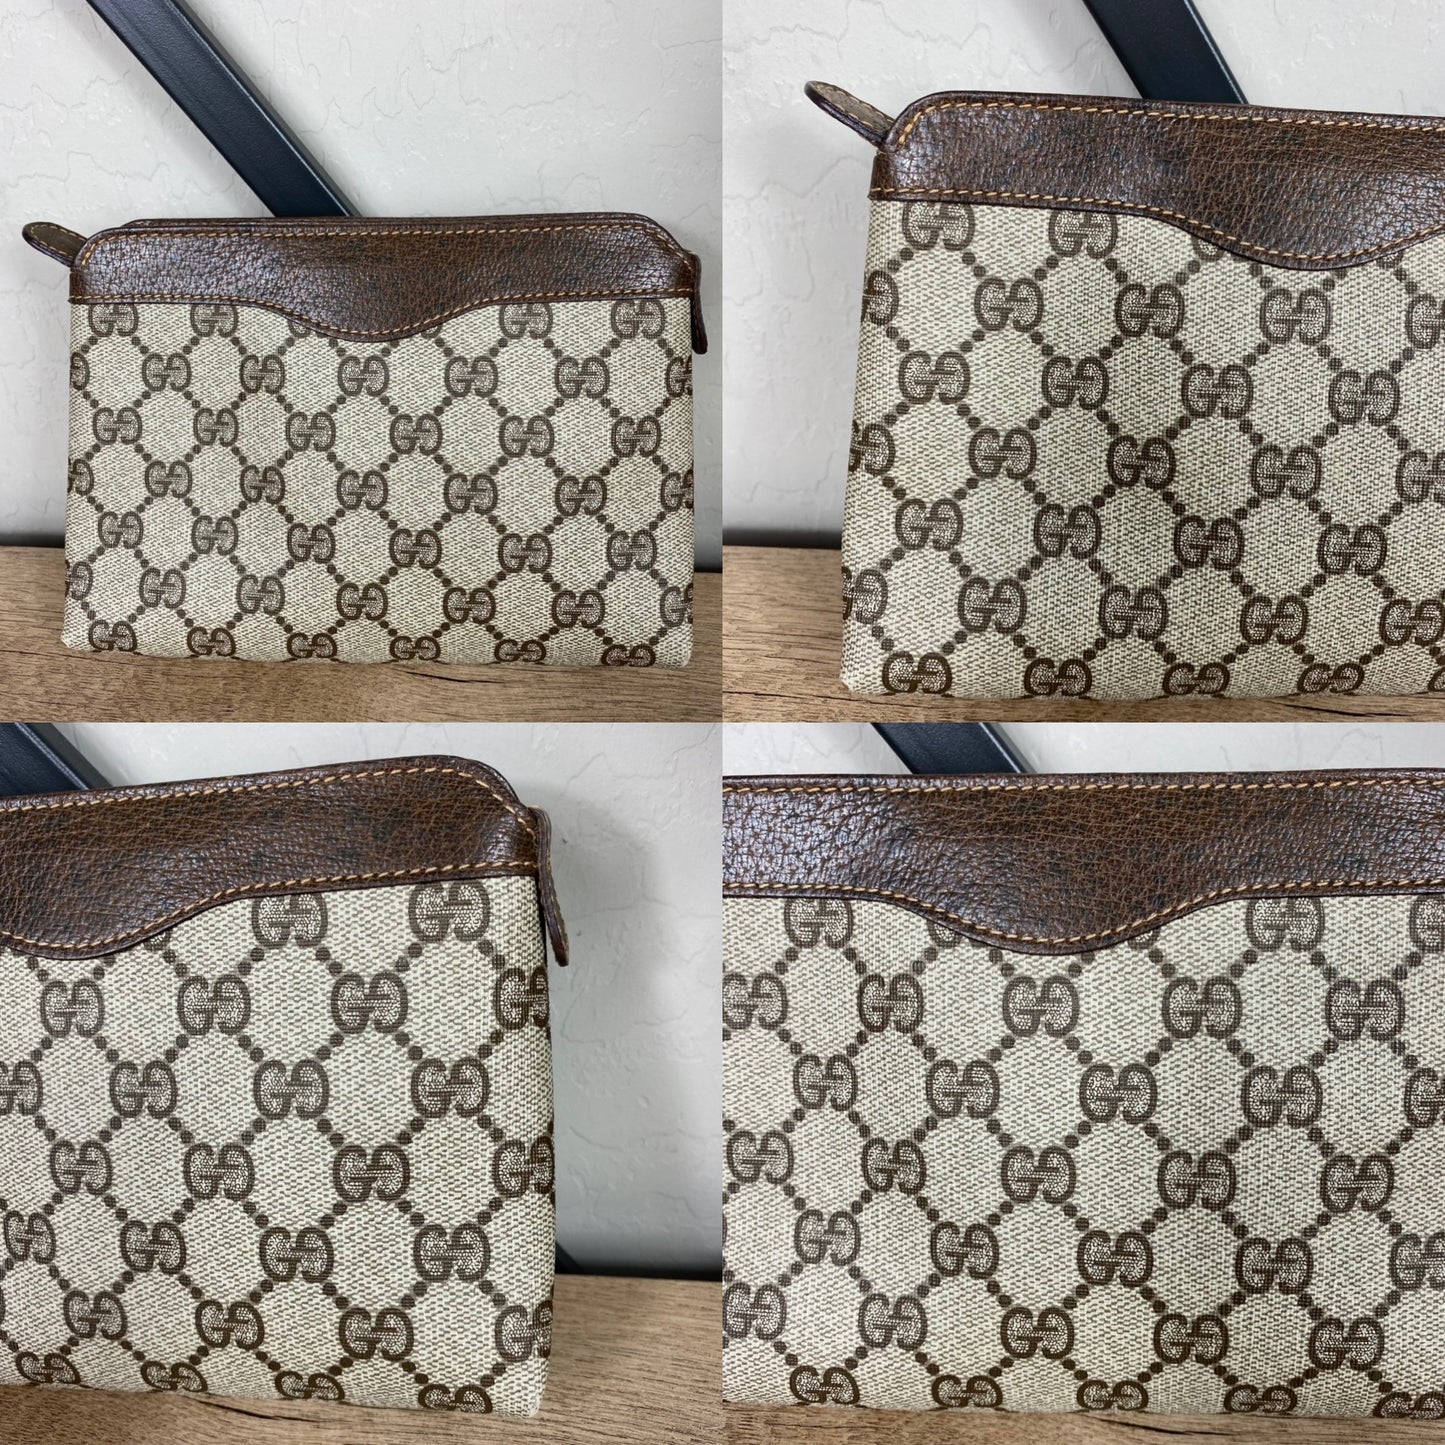 Gucci Vintage GG Cosmetic Zipper Pouch